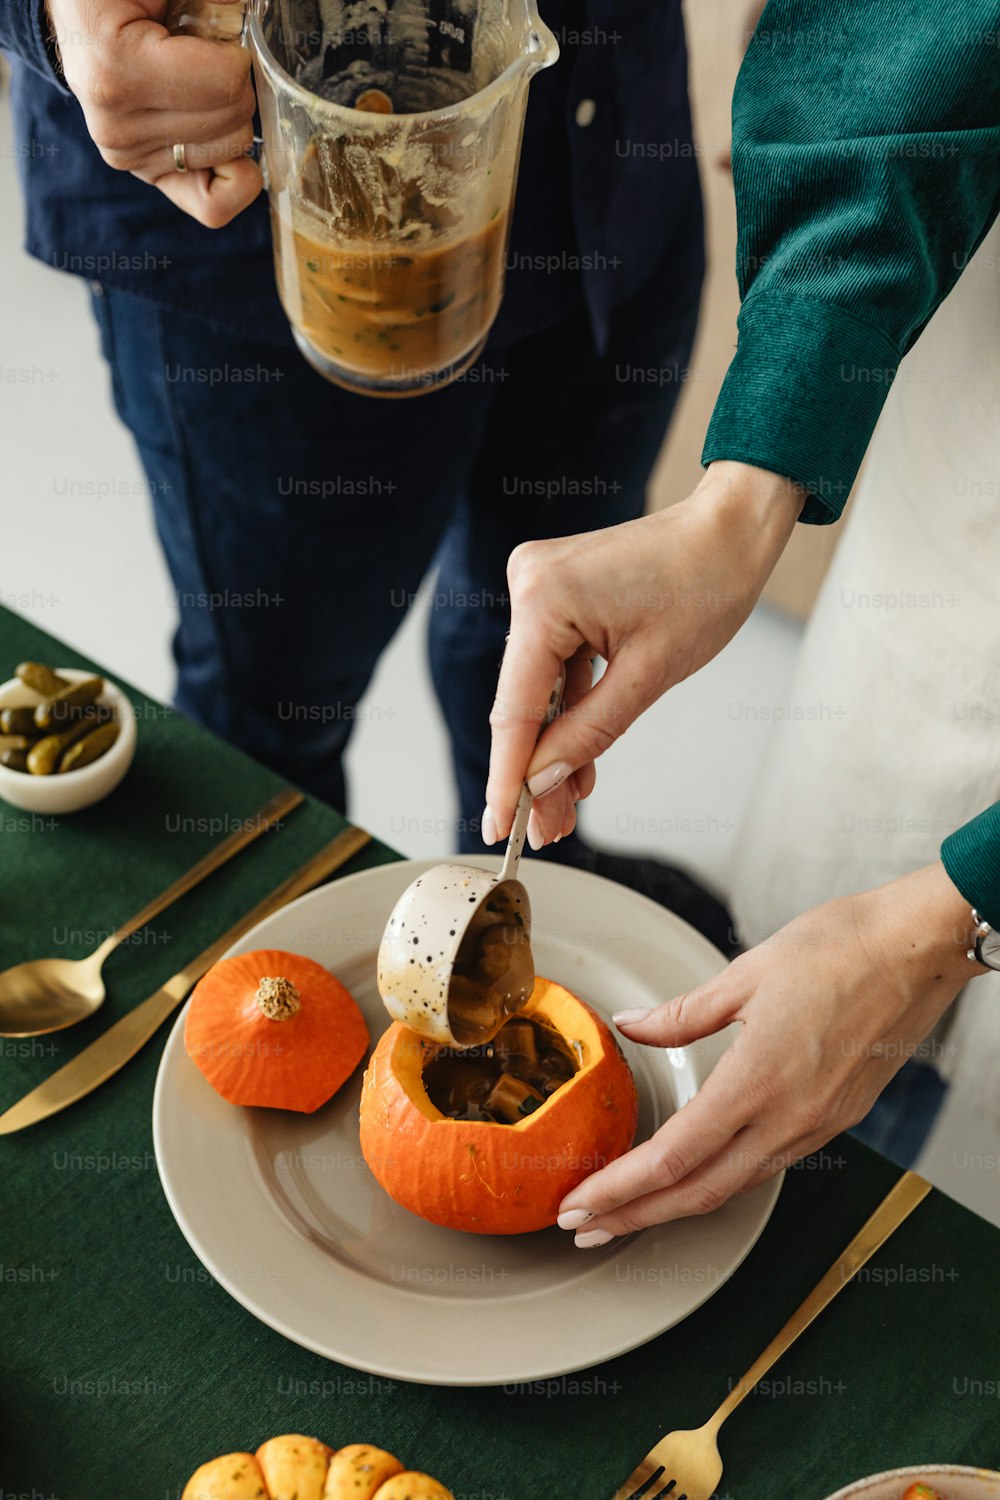 a person cutting into a pumpkin on a plate